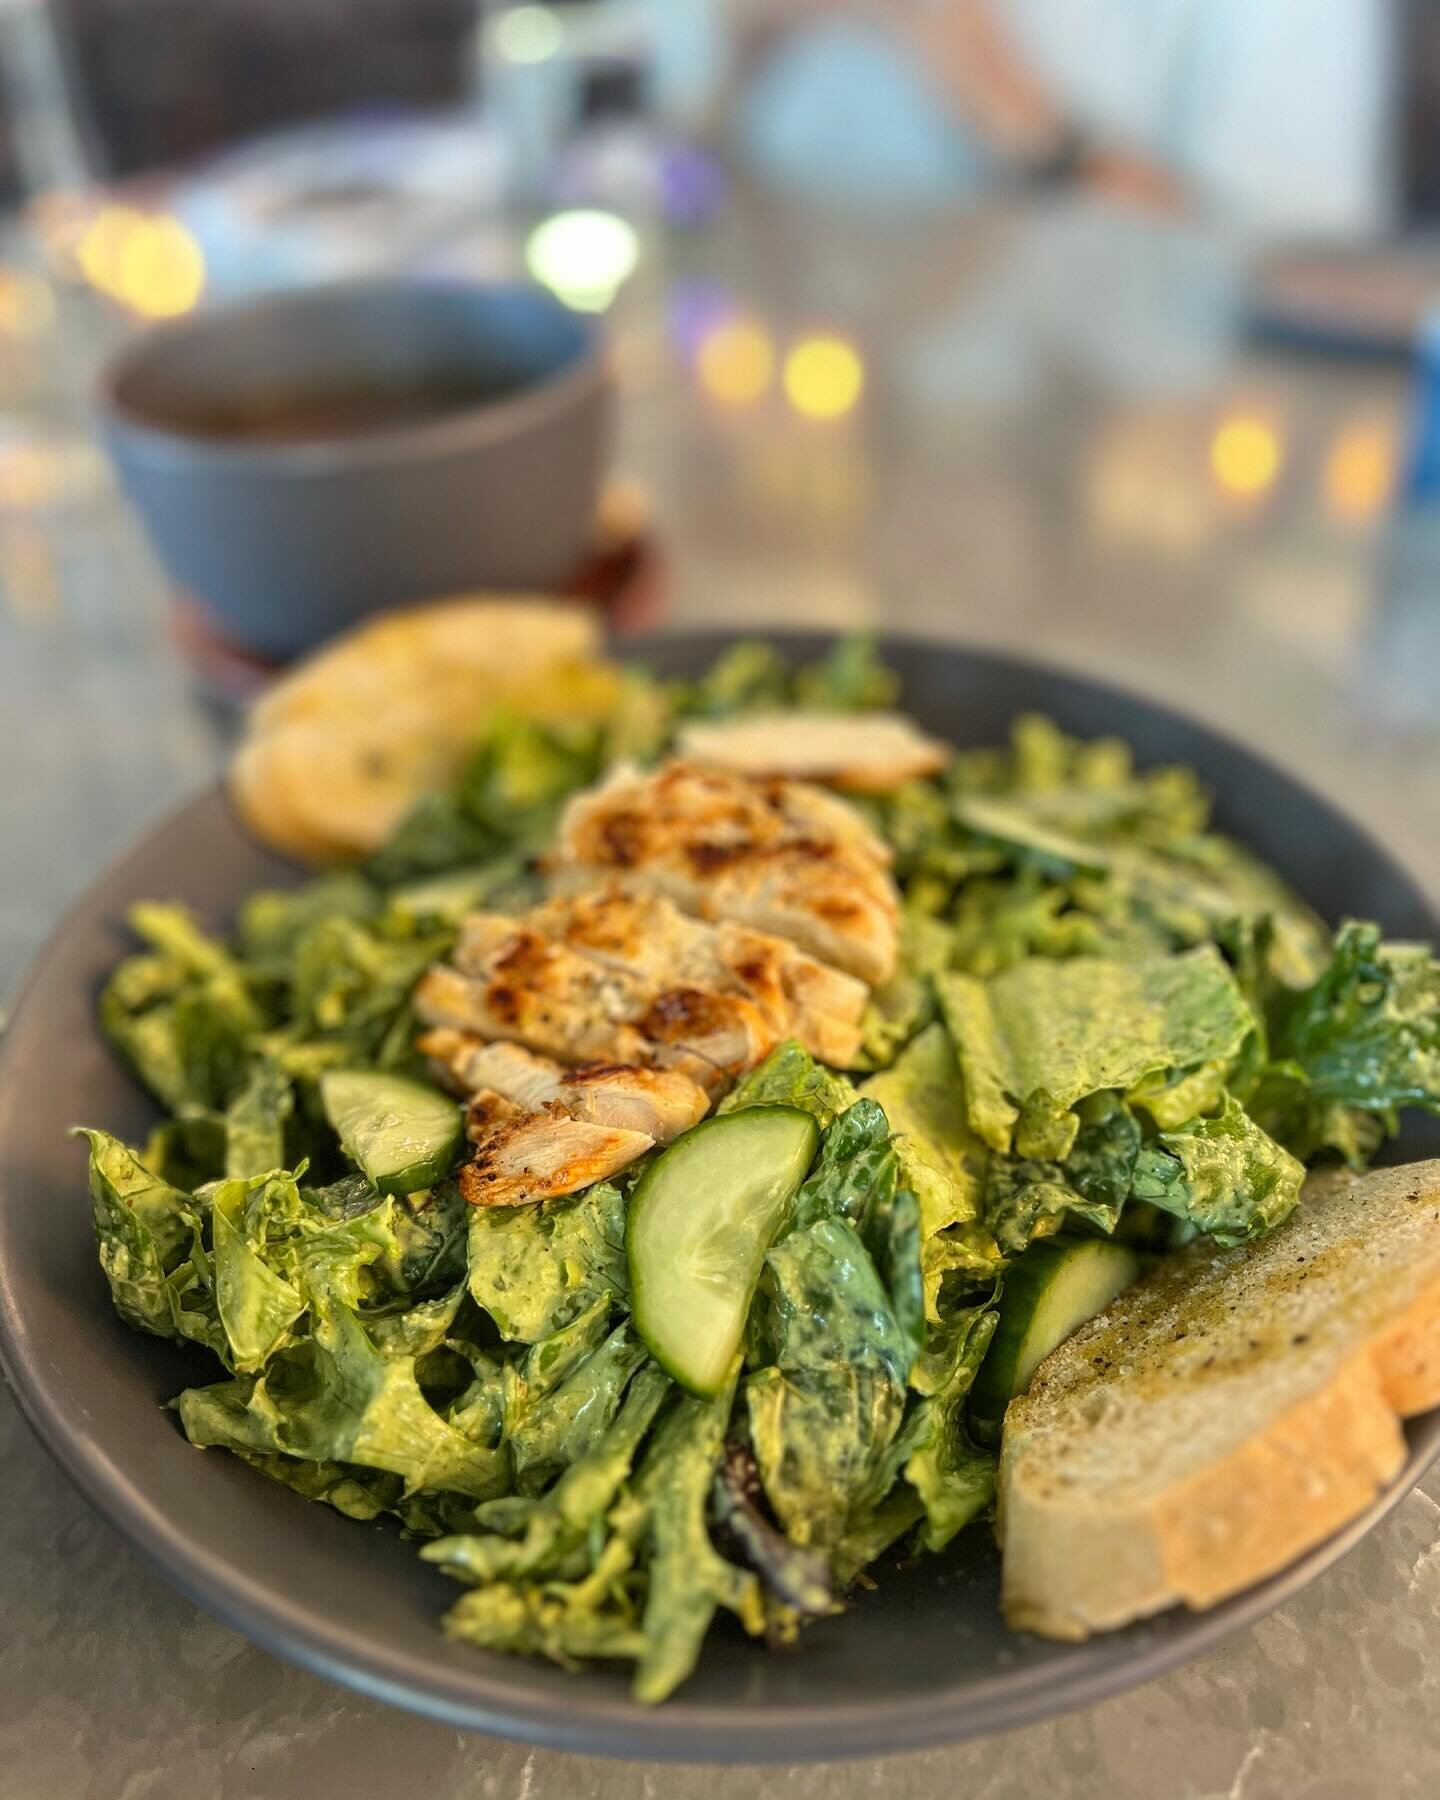 New Salad 🥗 Special!

✨ Green Goddess Salad made with mixed greens, spinach, grilled broccolini, and cucumbers mixed in a green goddess salad. Take it to the next level with grilled chicken!